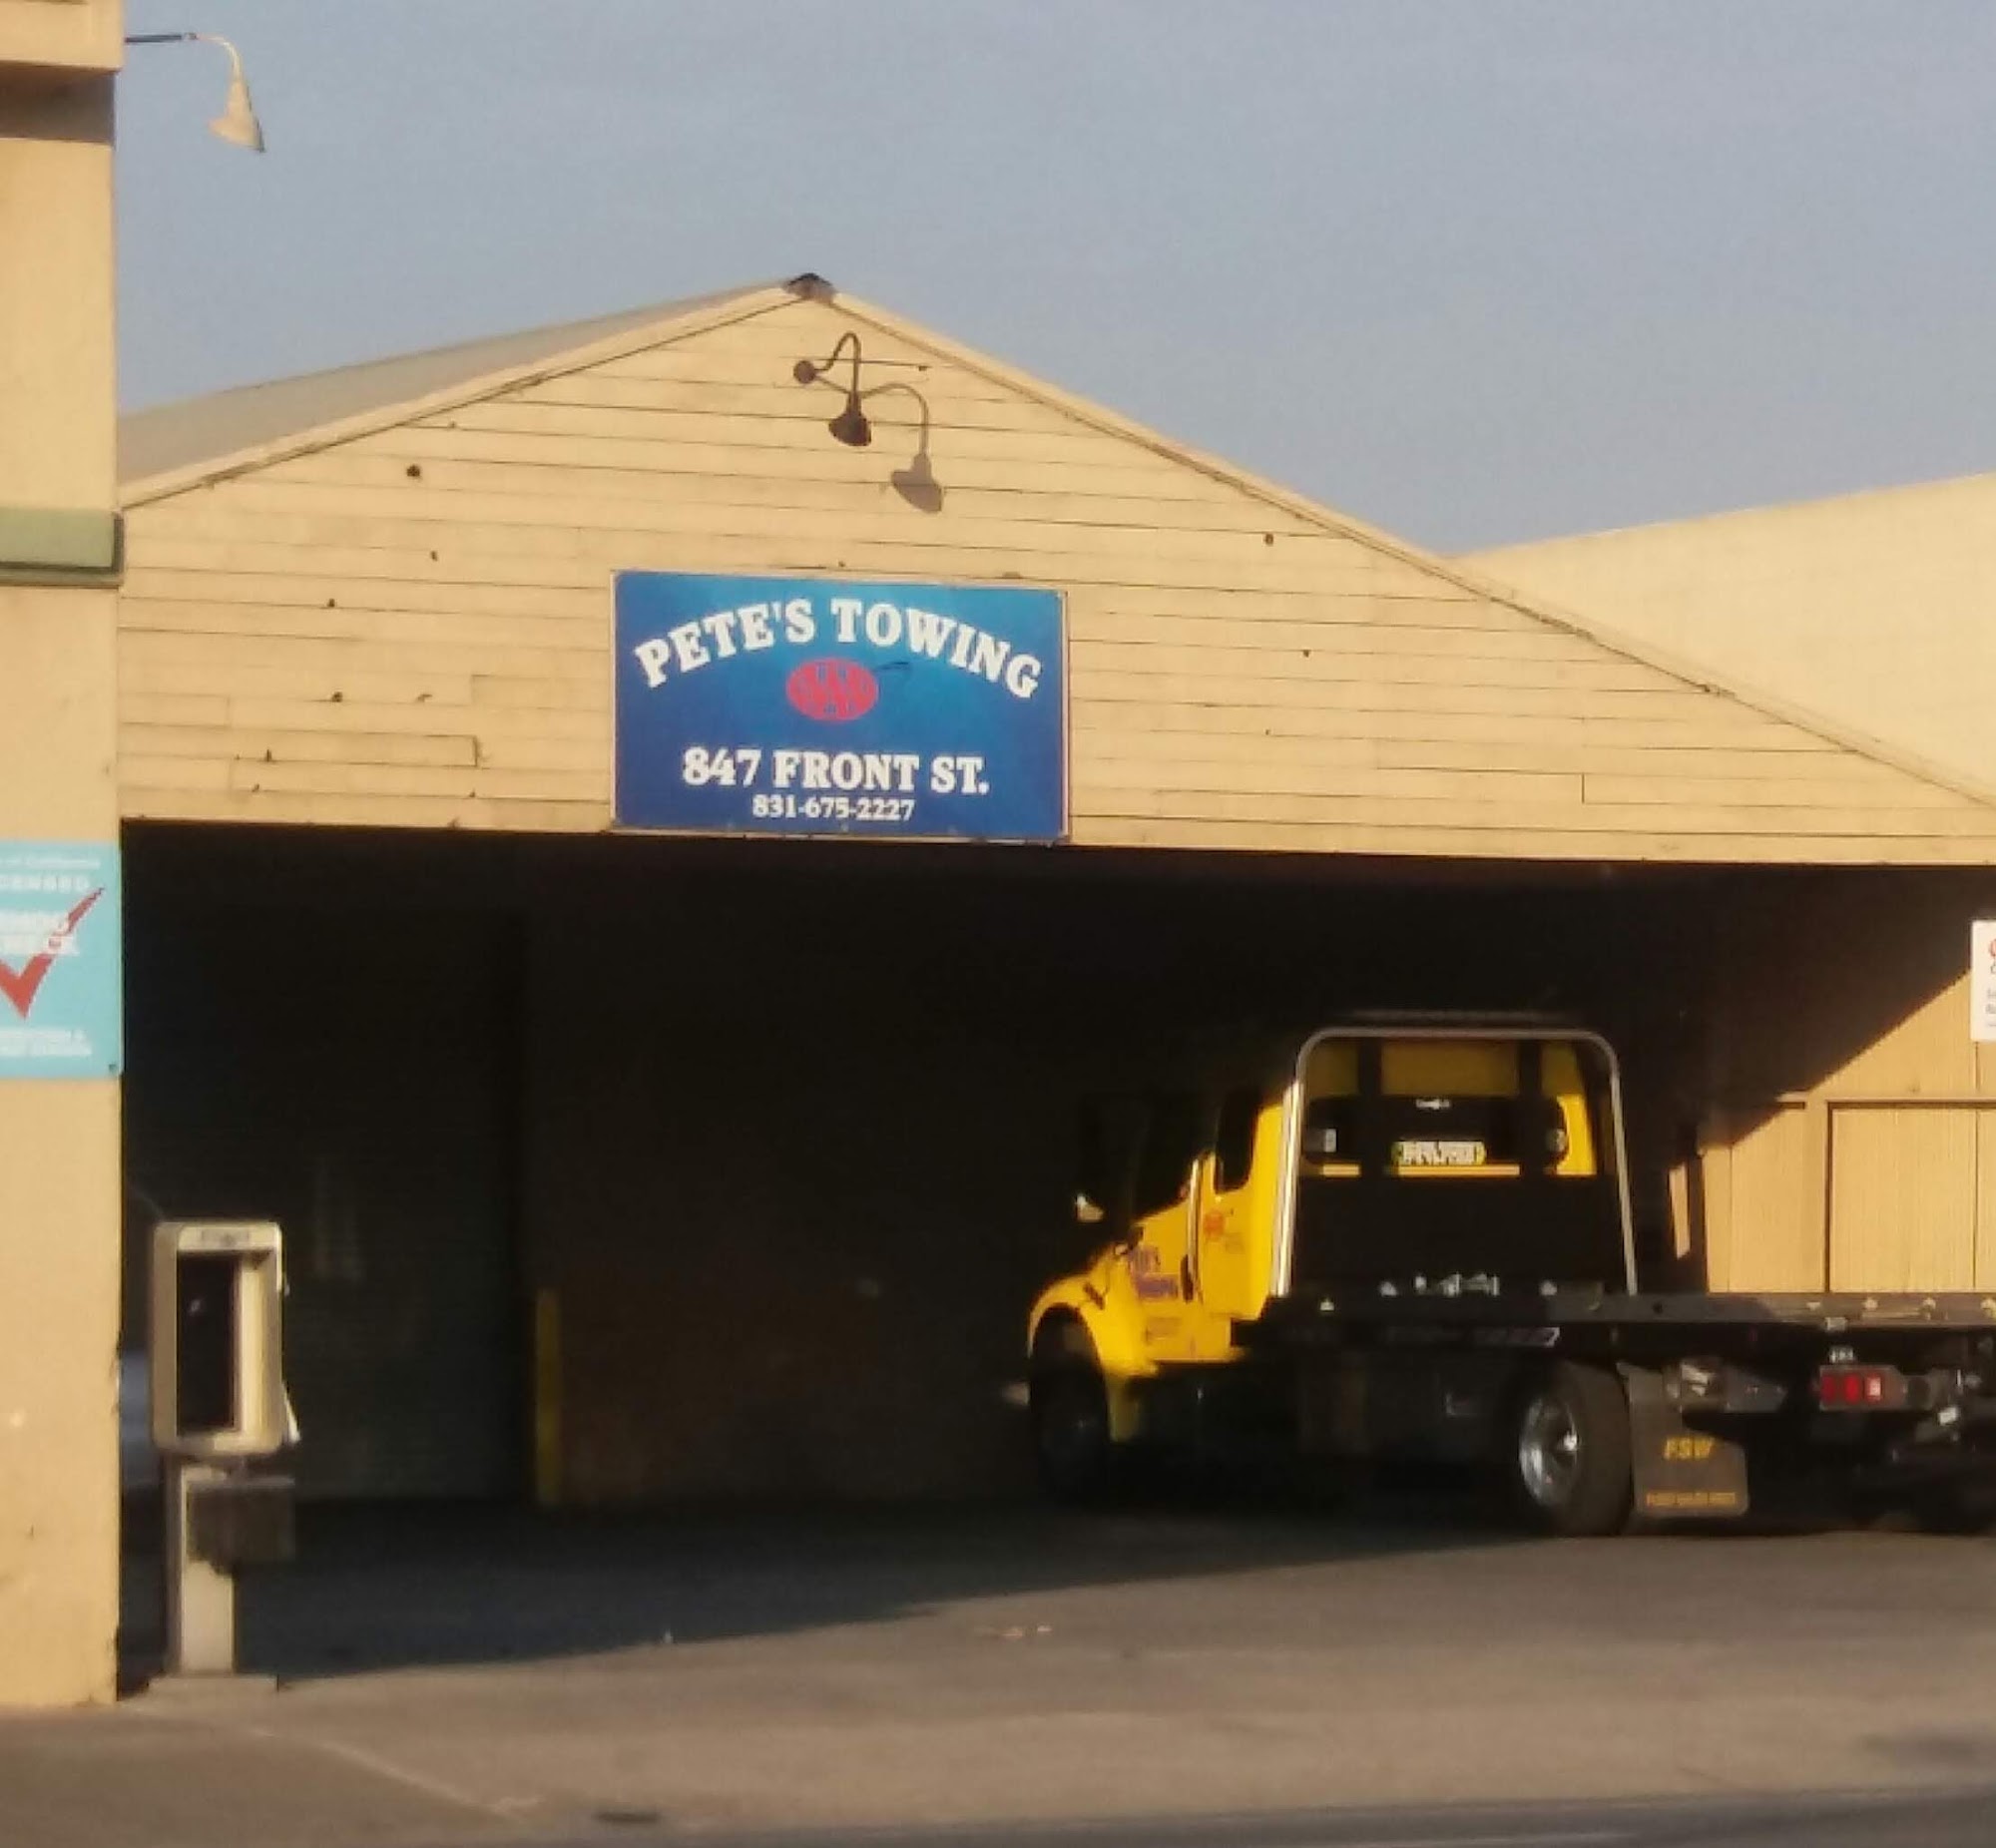 Pete's Towing 847 Front St, Soledad California 93960